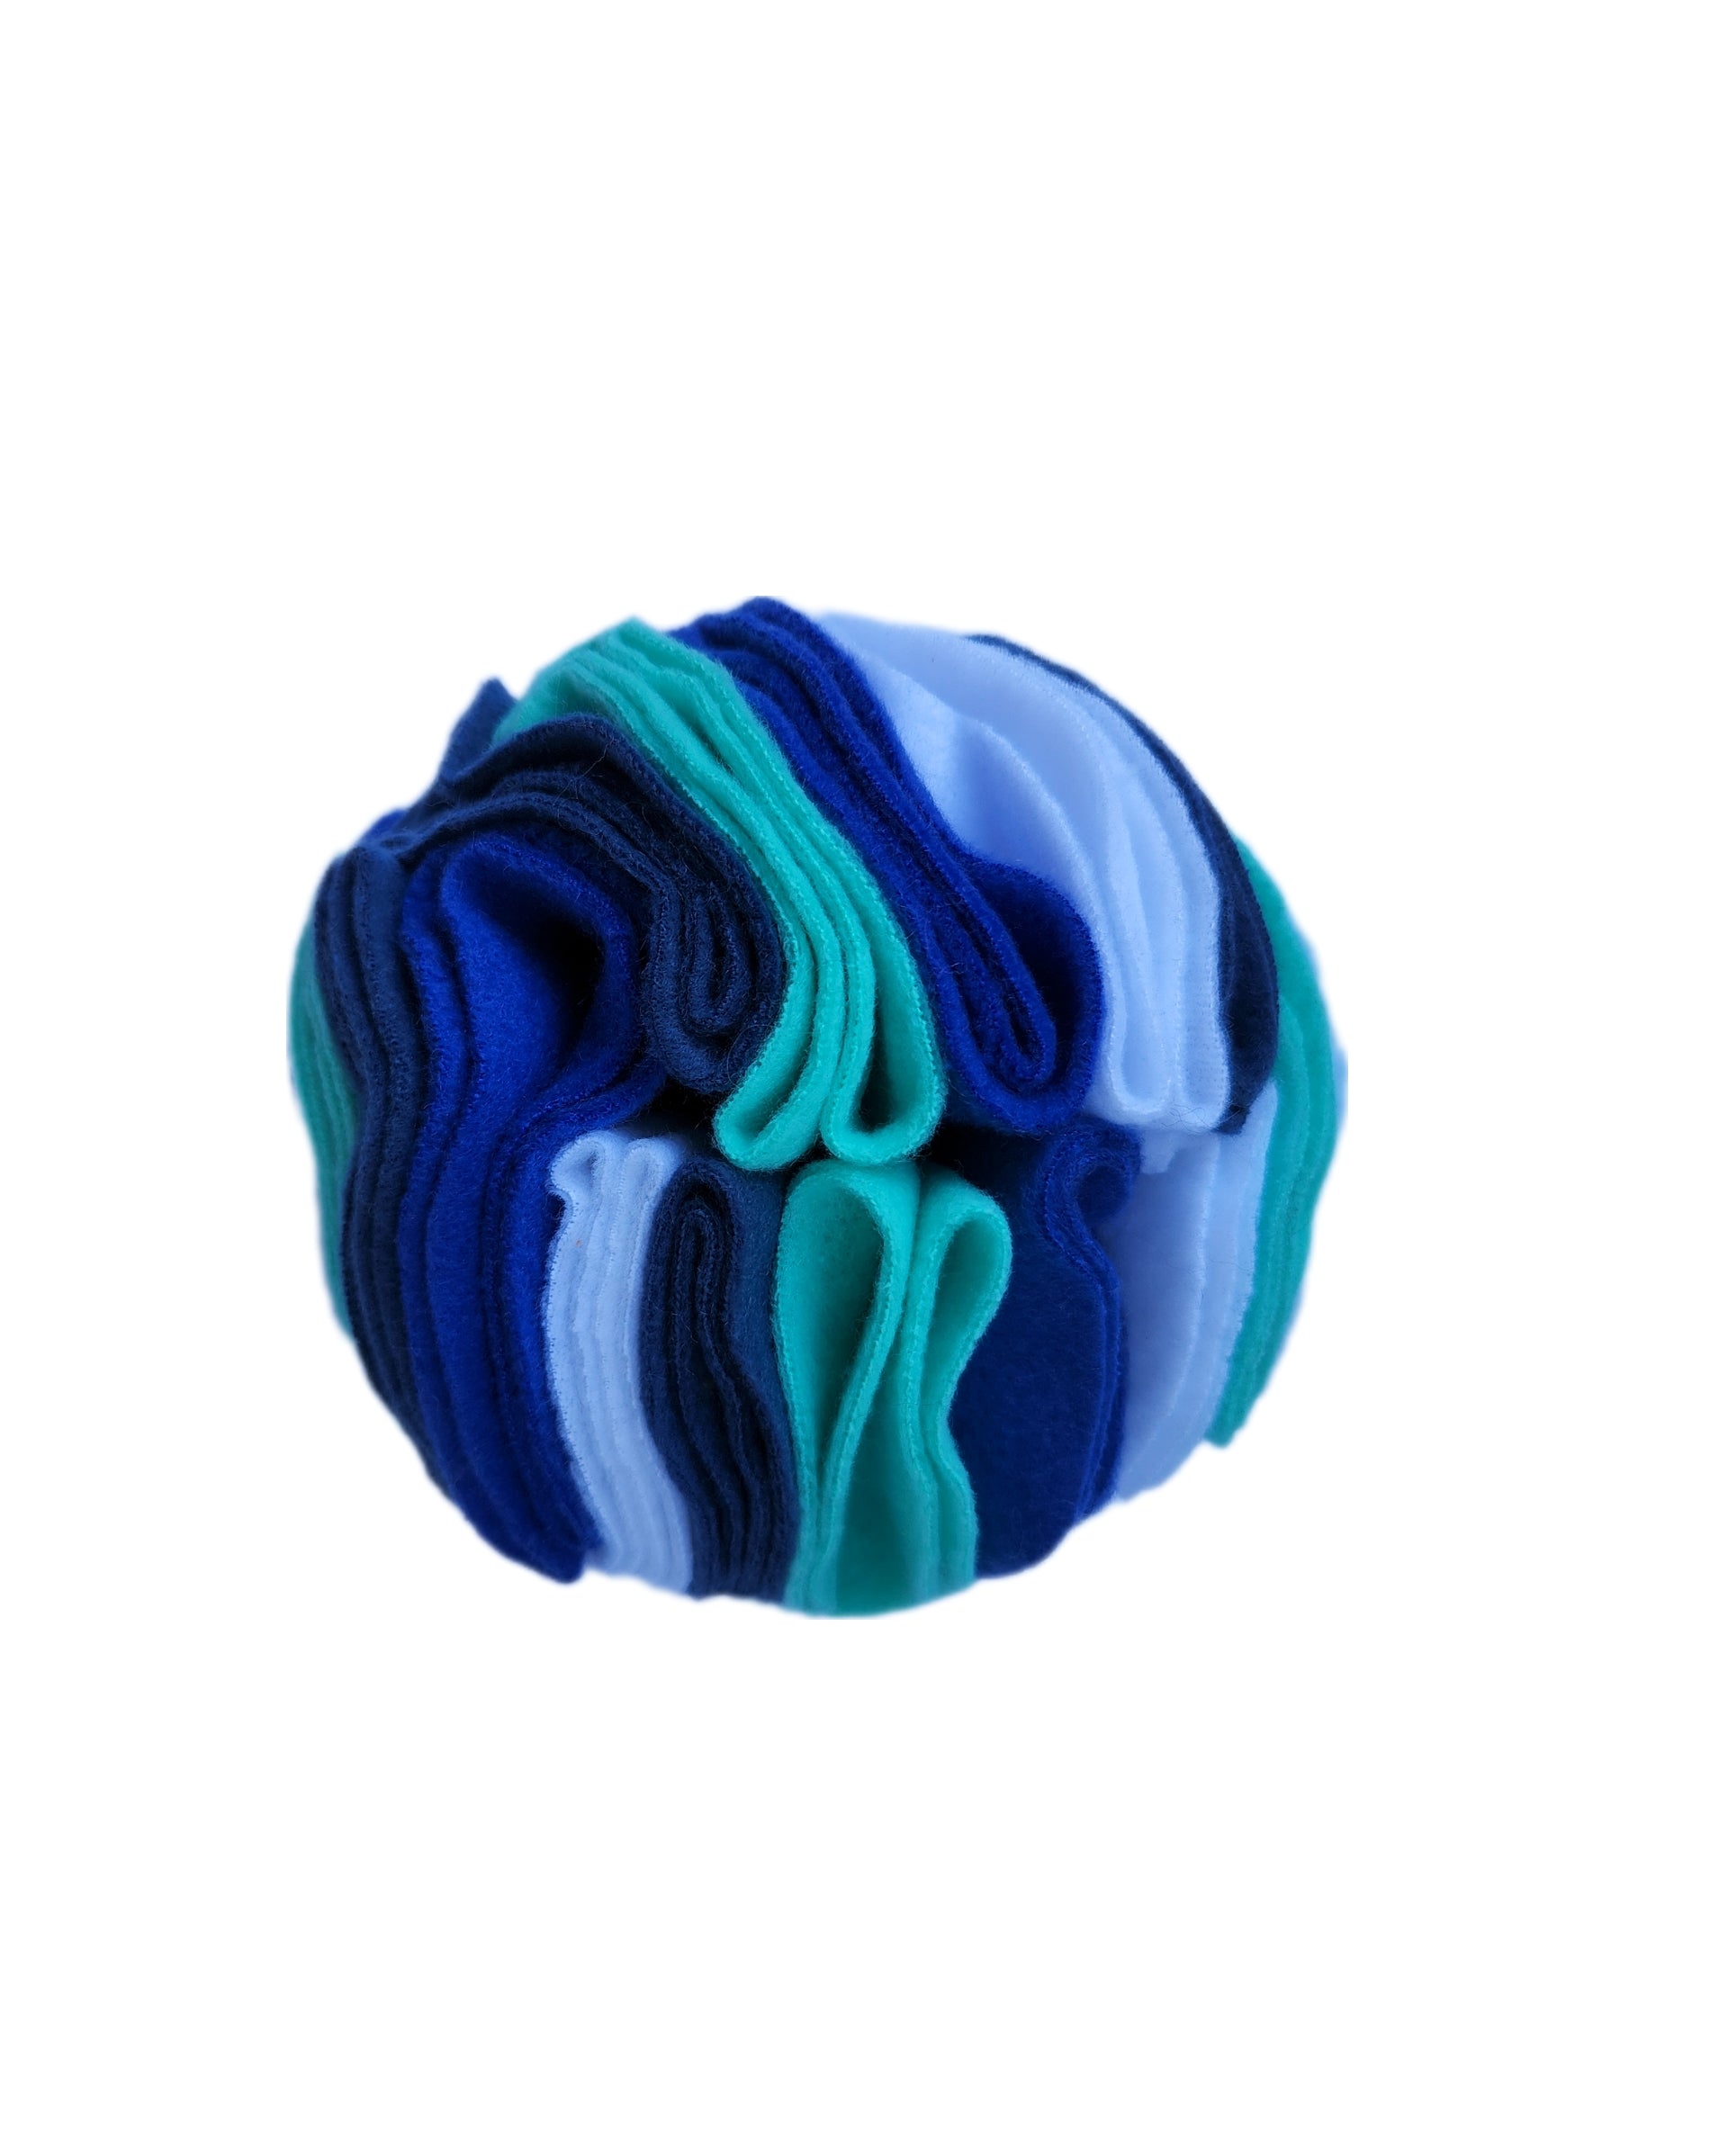 Snuffle ball for dogs